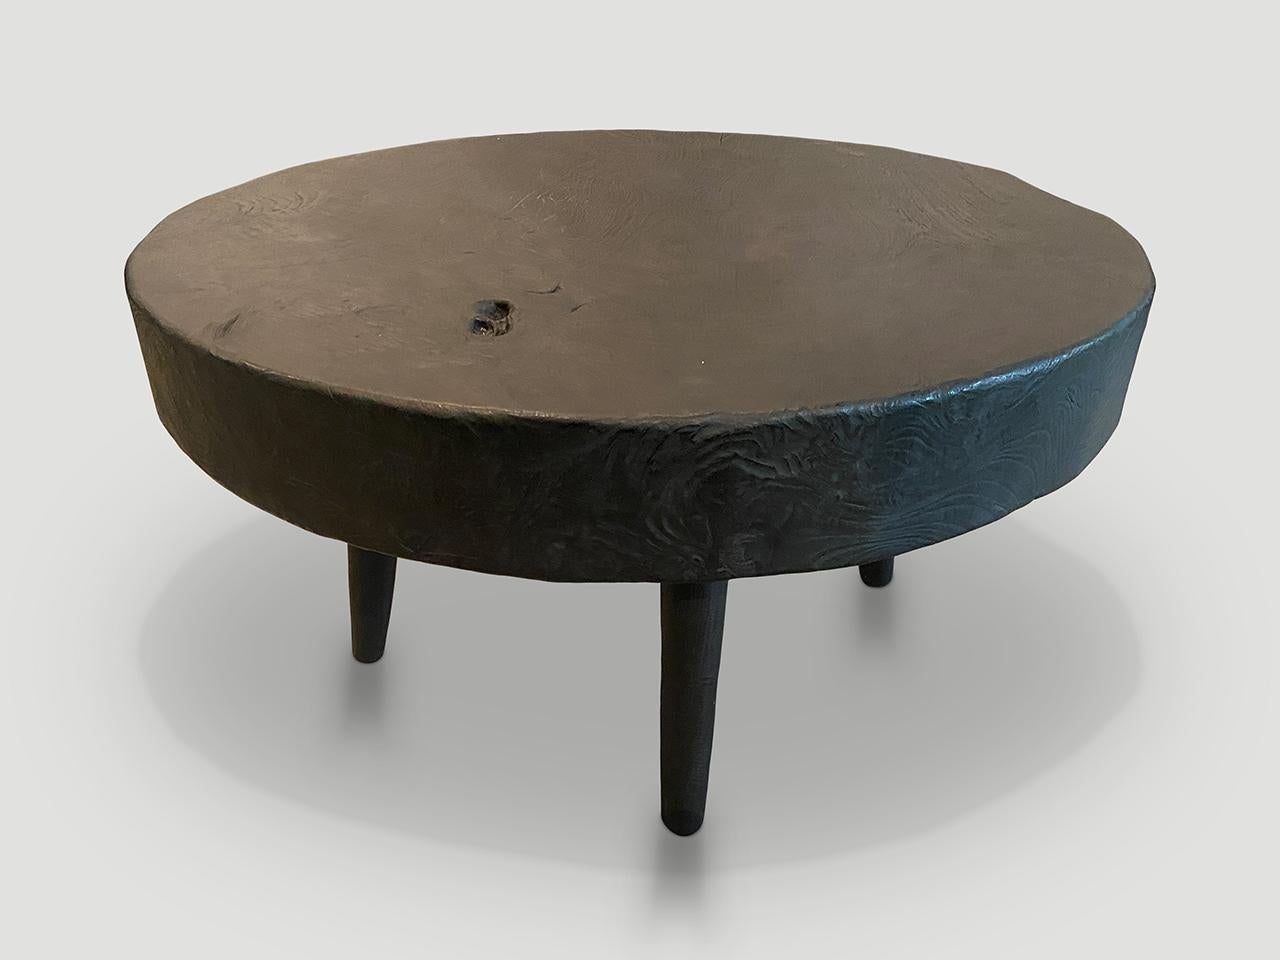 Andrianna Shamaris Charred Reclaimed Teak Wood Coffee Table In Excellent Condition For Sale In New York, NY